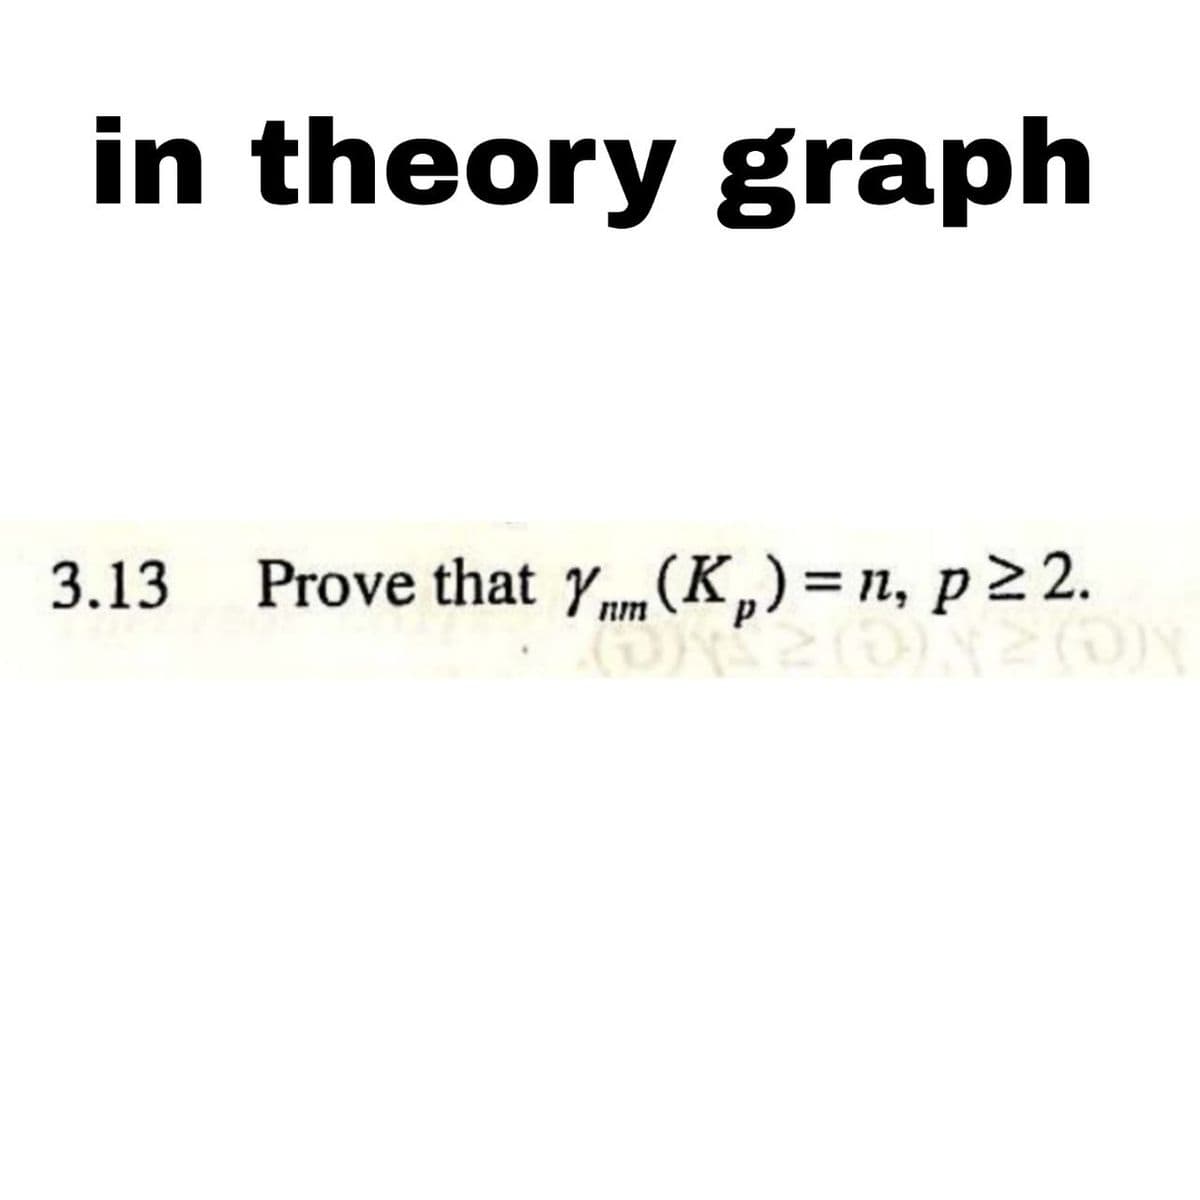 in theory graph
3.13 Prove that Y™(Kp) = n, p≥2.
(0)2(5)
OY